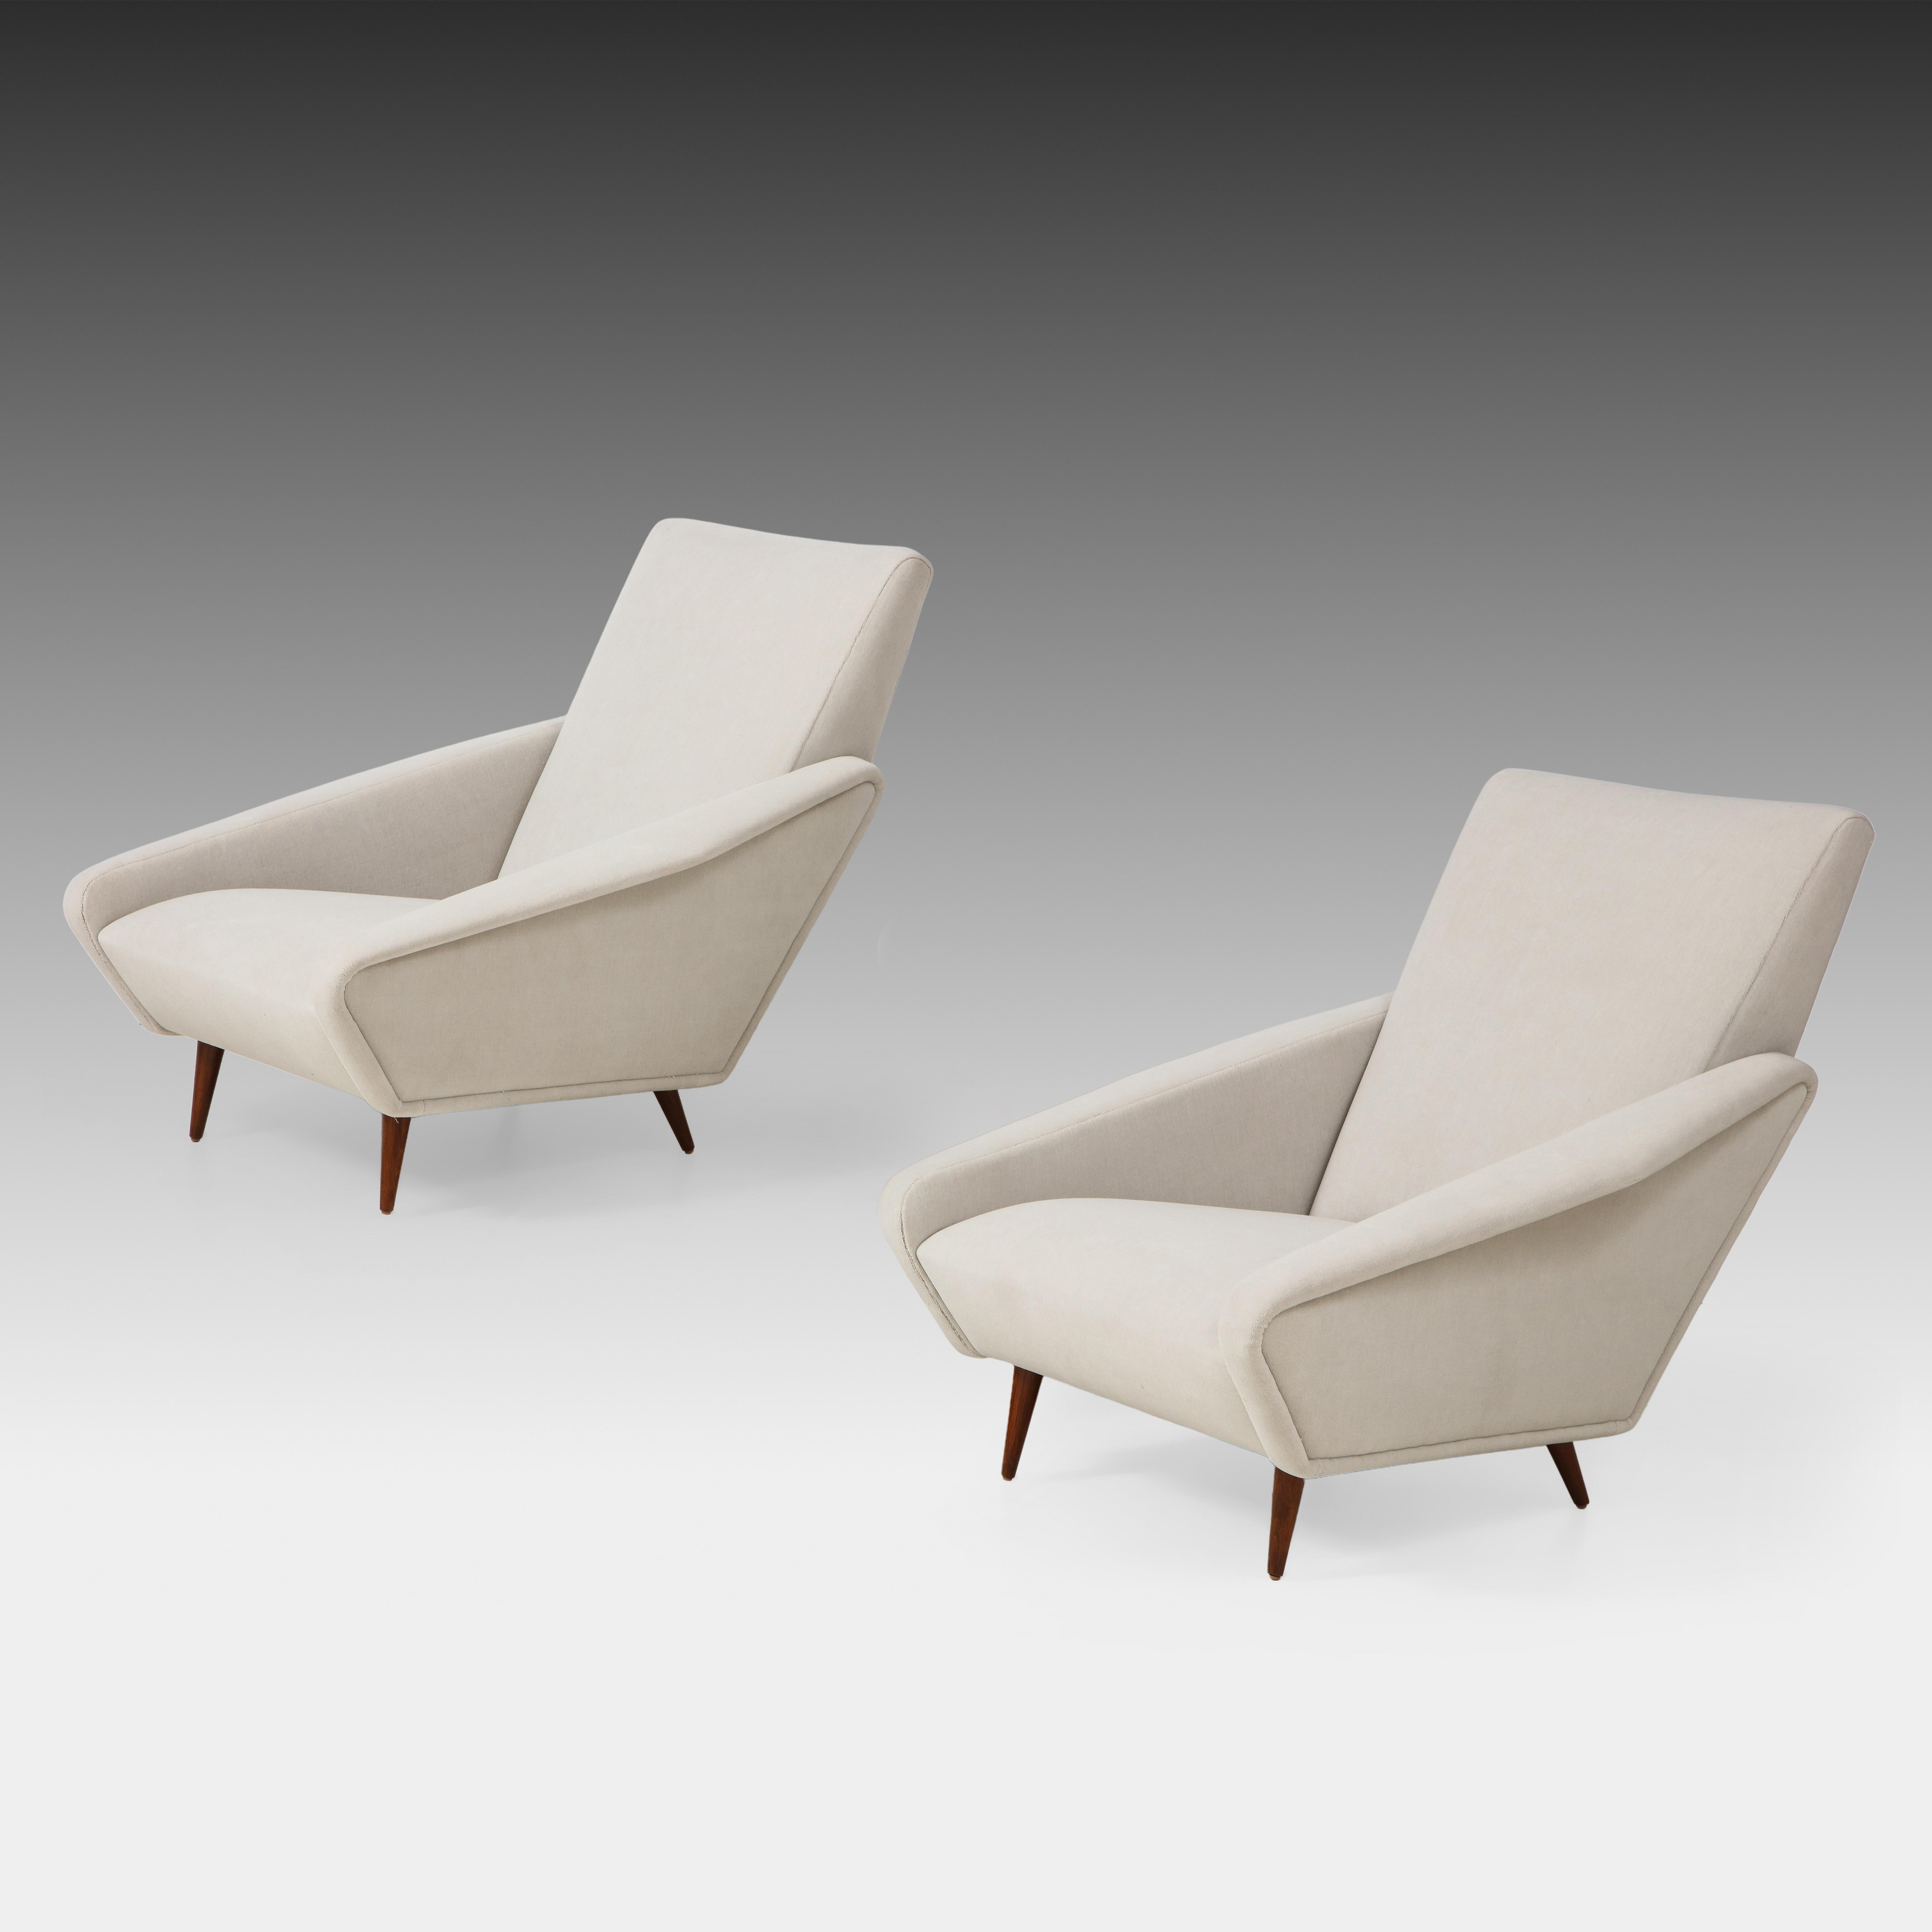 Gio Ponti for Cassina rare pair of Distex lounge chairs model 807 with pale gray velvet upholstered back, seat and arms, and walnut legs. Fully restored and newly reupholstered in a luxurious Holland & Sherry Rambouillet Platinum or pale gray wool